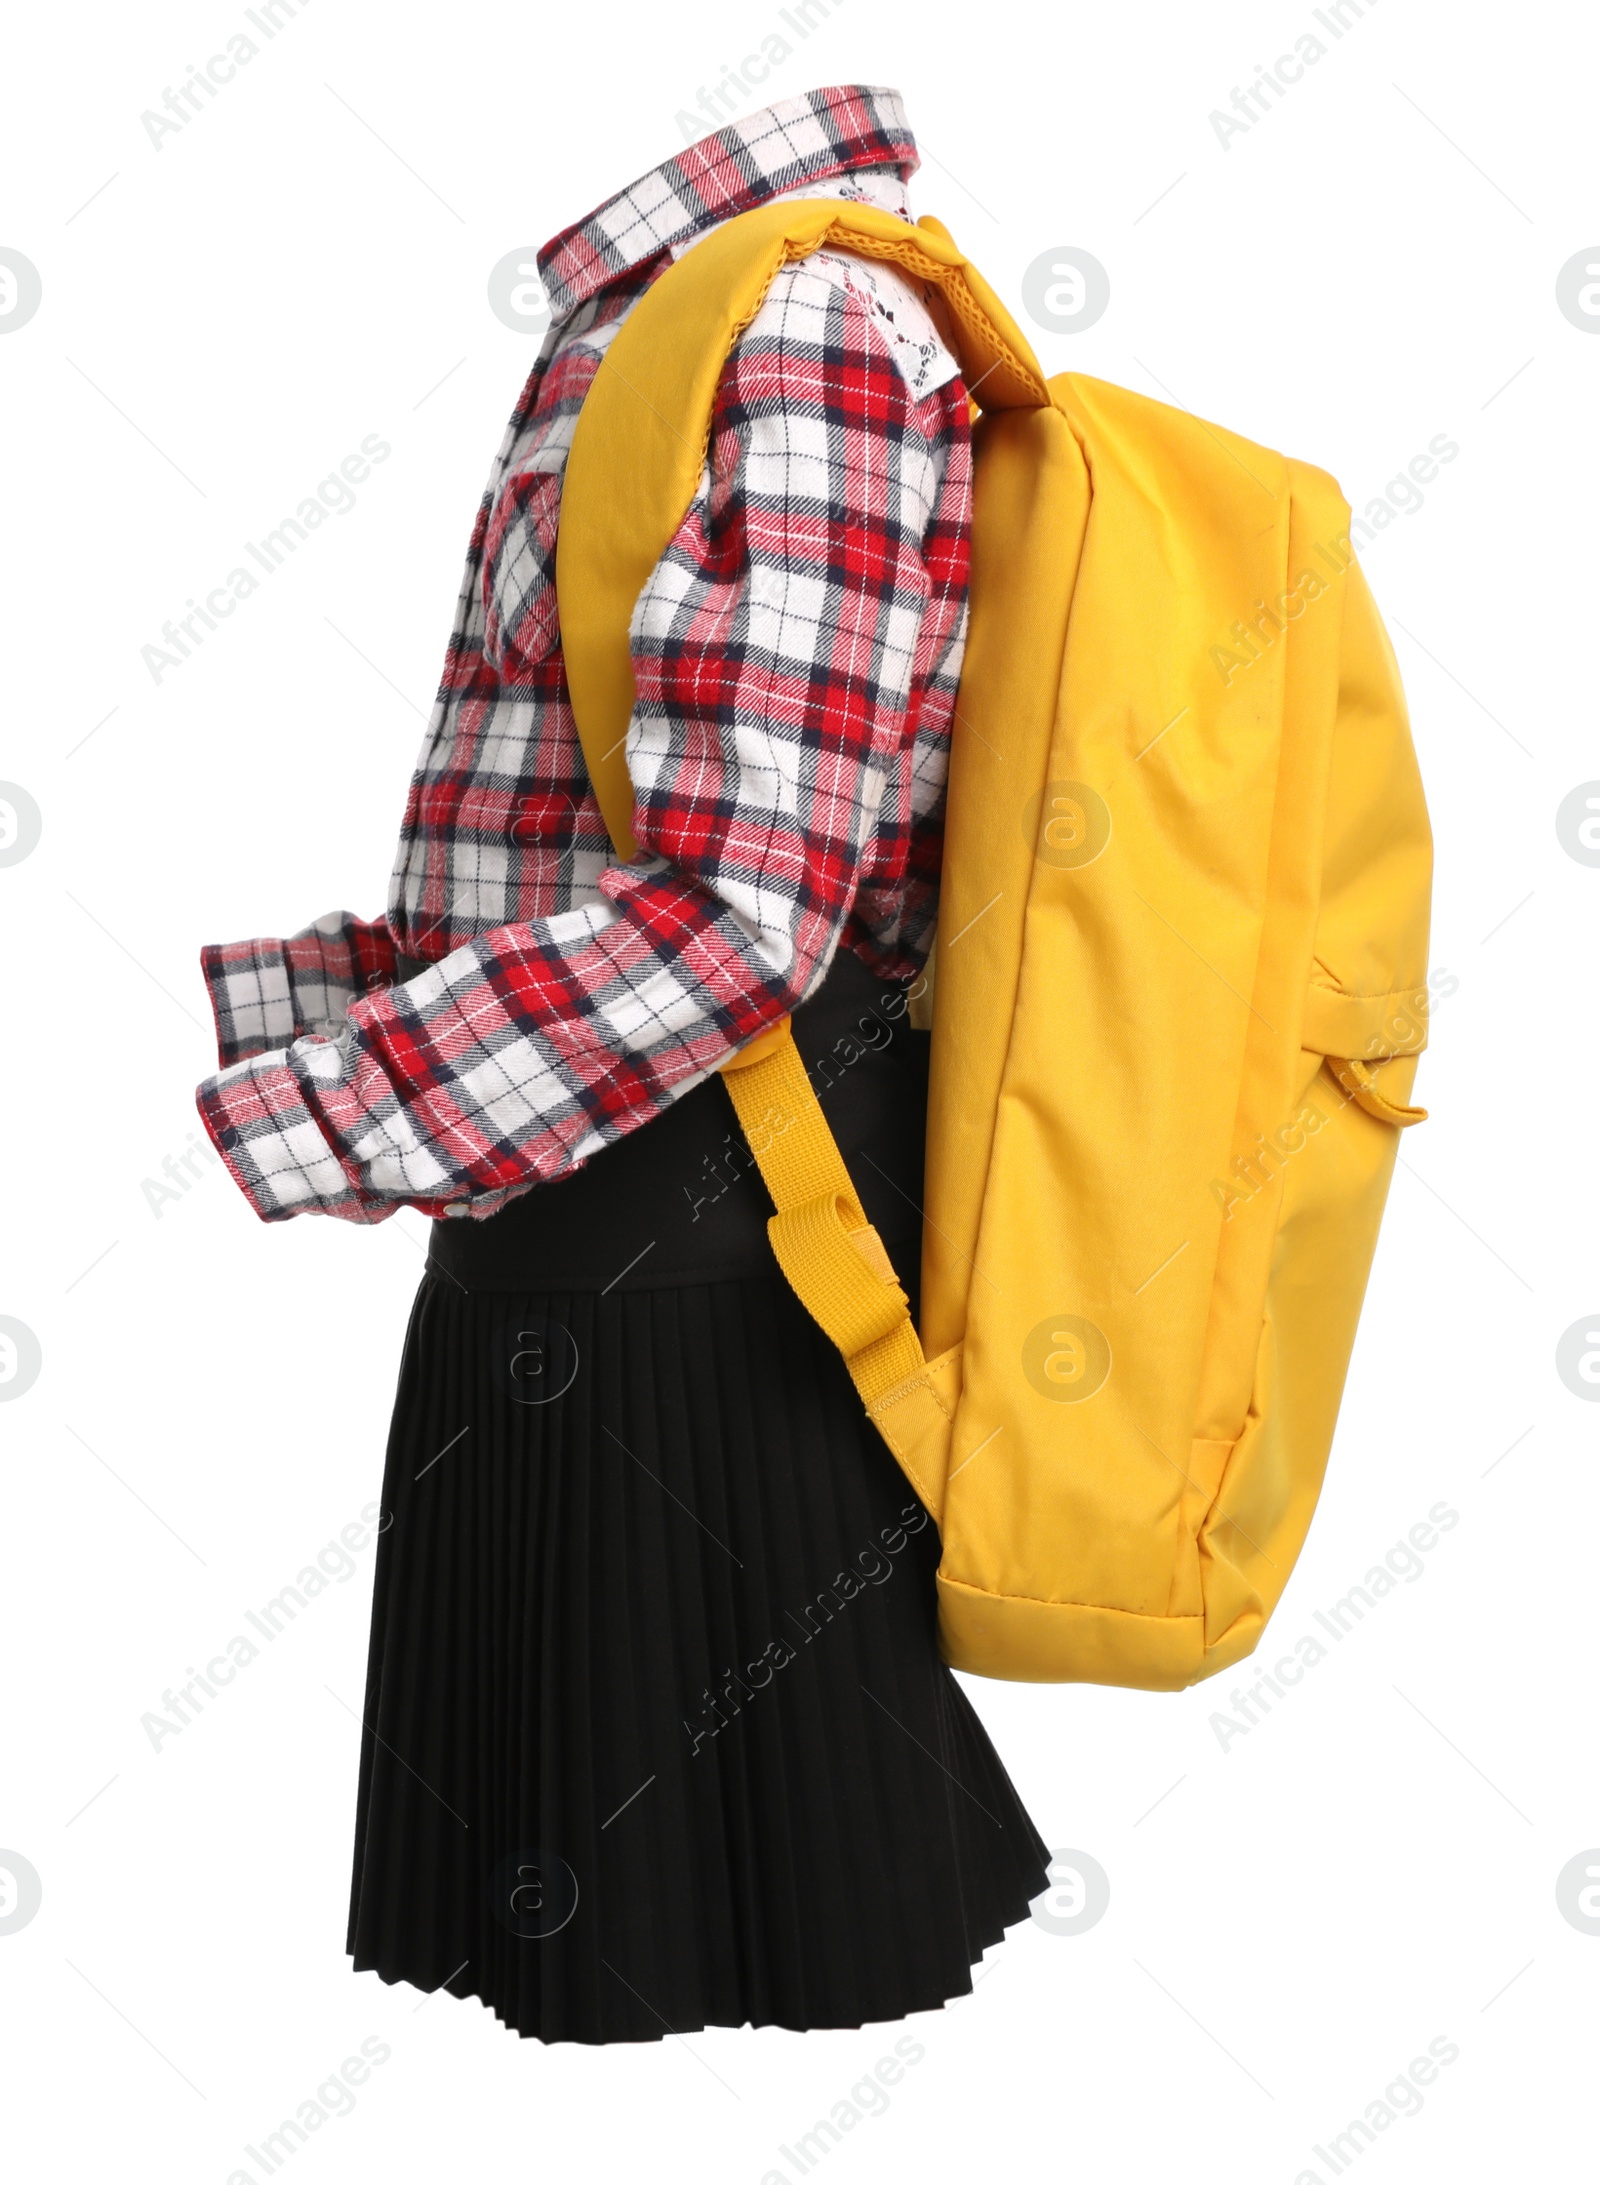 Image of School uniform for girl and backpack on white background